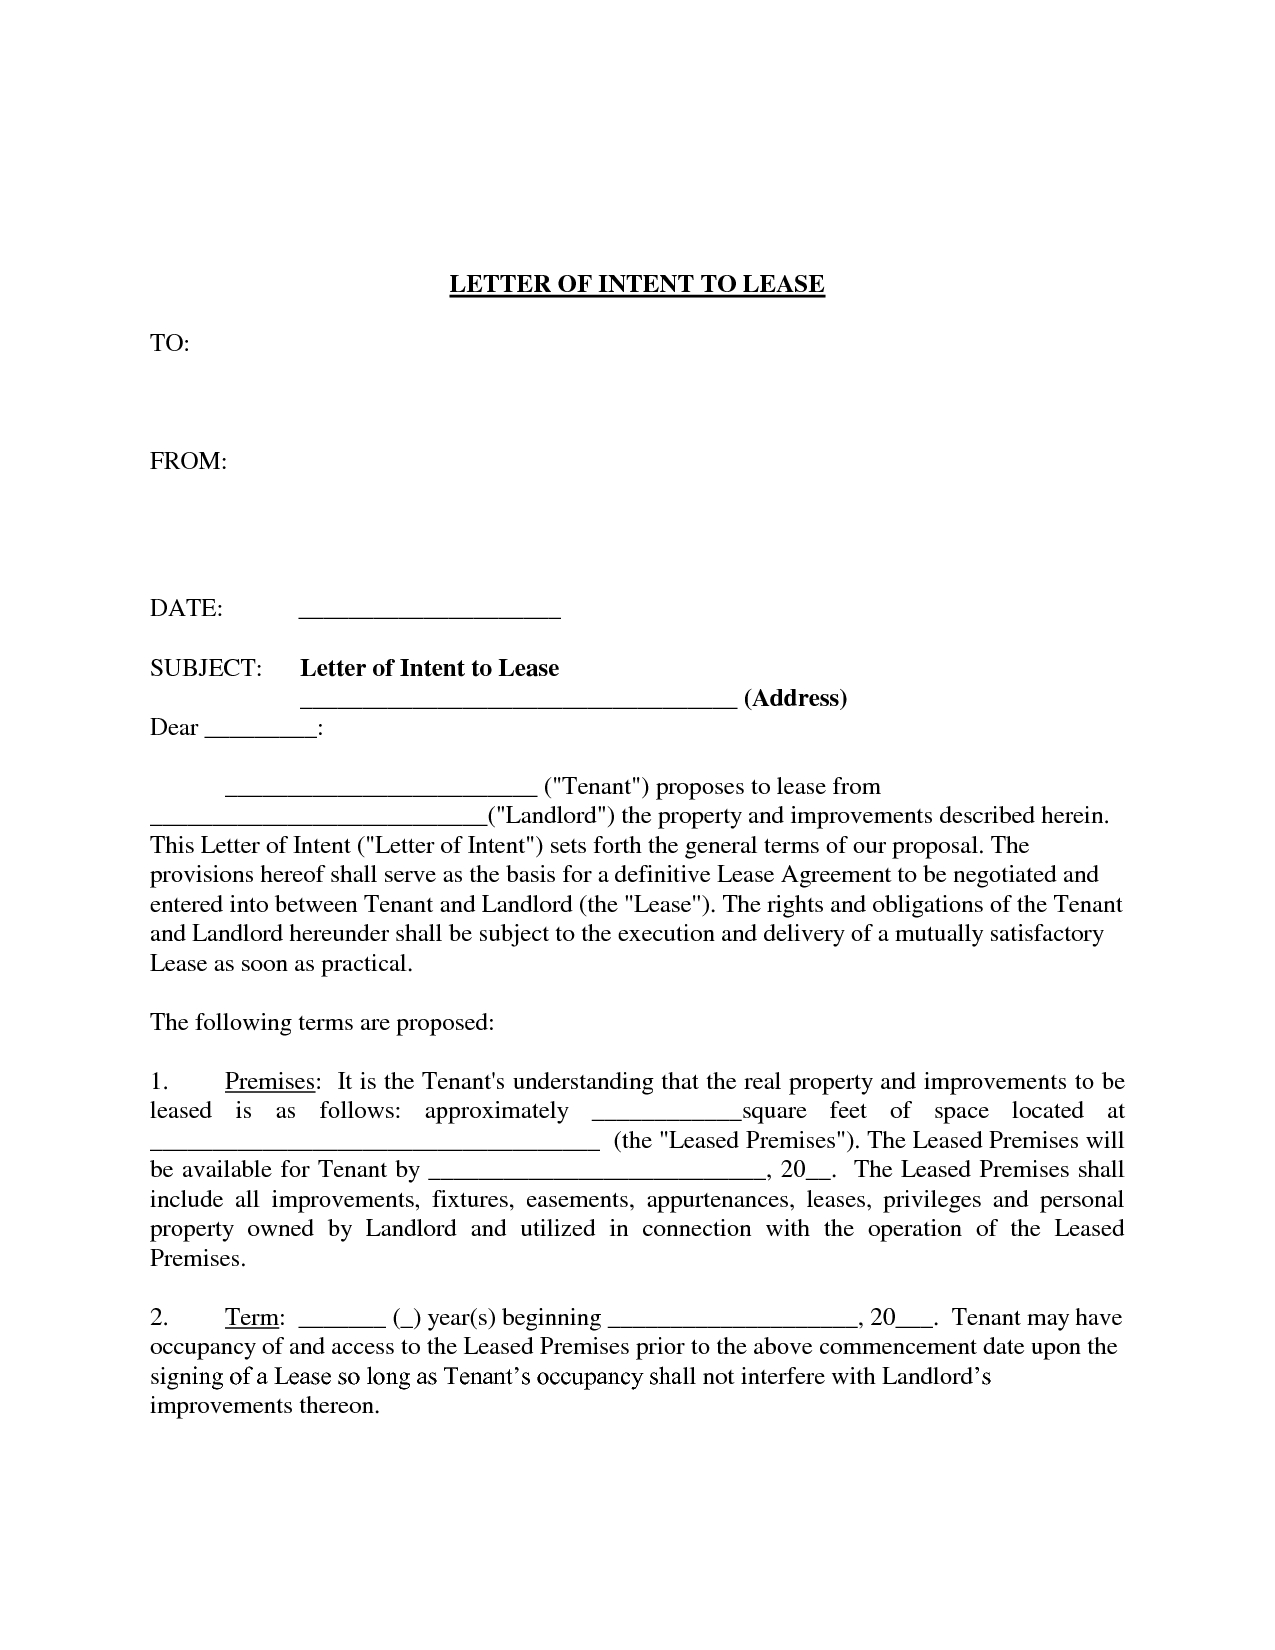 free-letter-of-intent-to-lease-commercial-space-template-samples